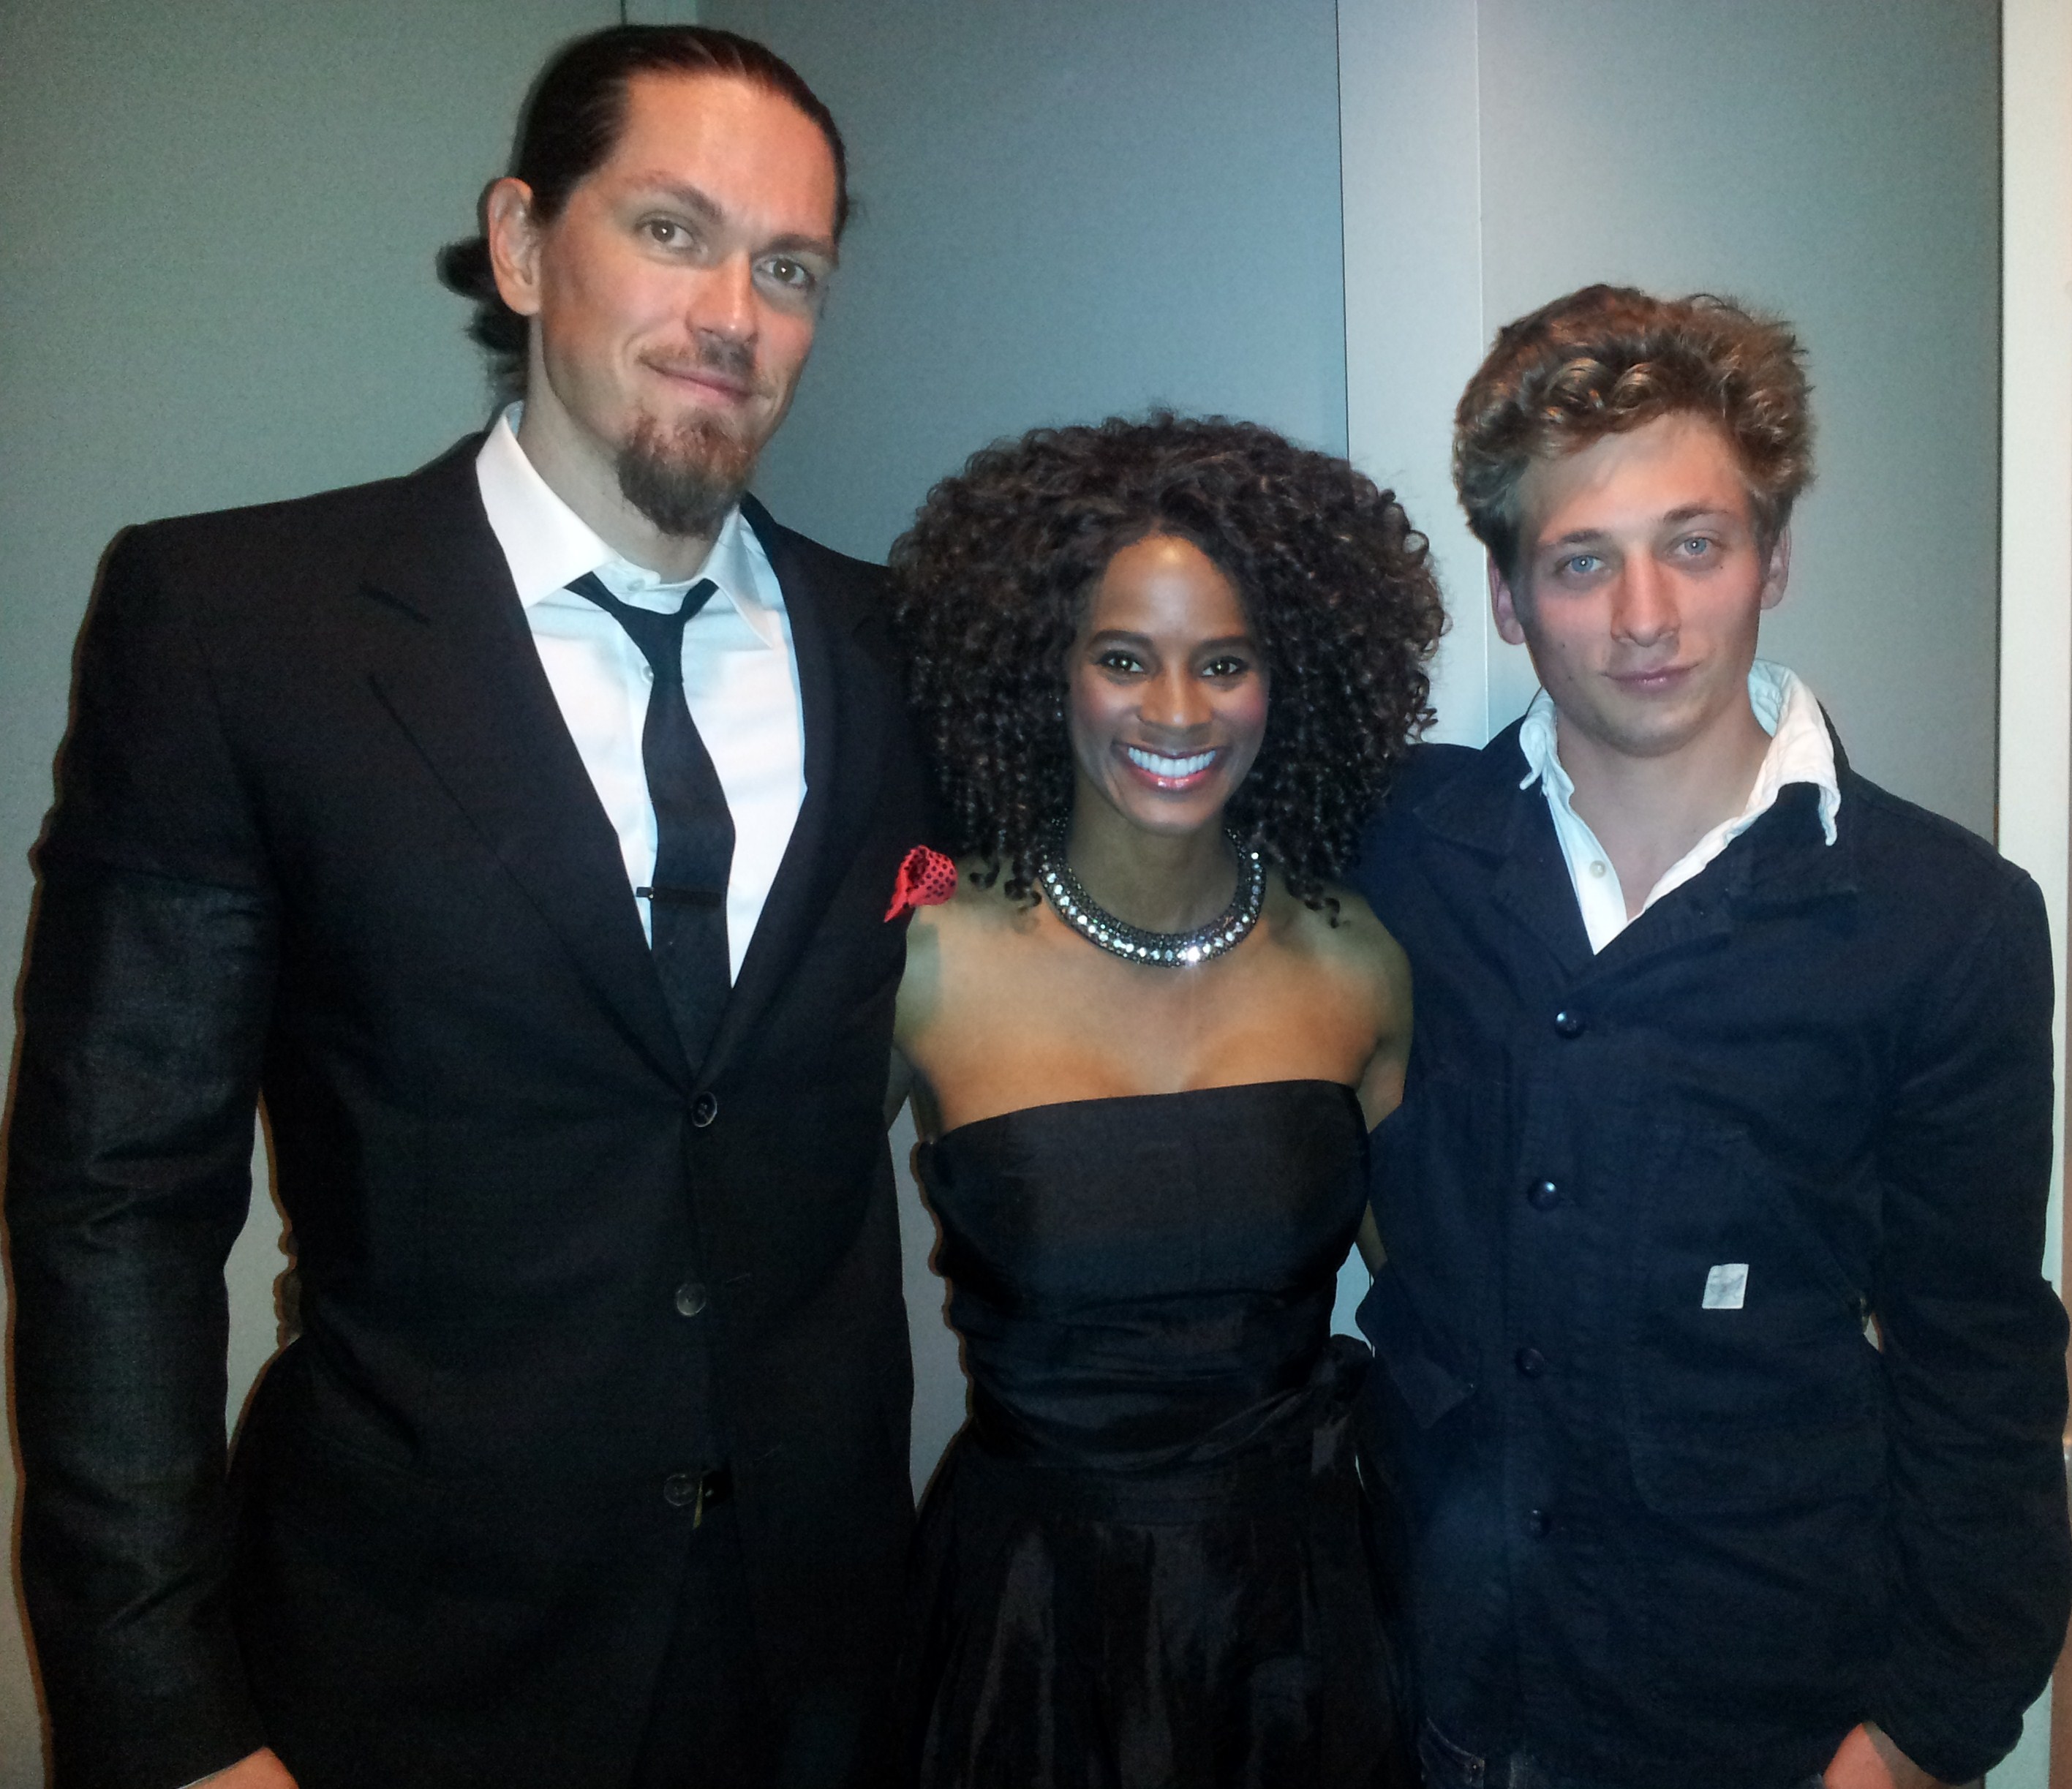 Actress Germany Kent, with fellow Actors Jeremy Allen White, and Steve Howey, at SAG-AFTRA NFMLA Gala